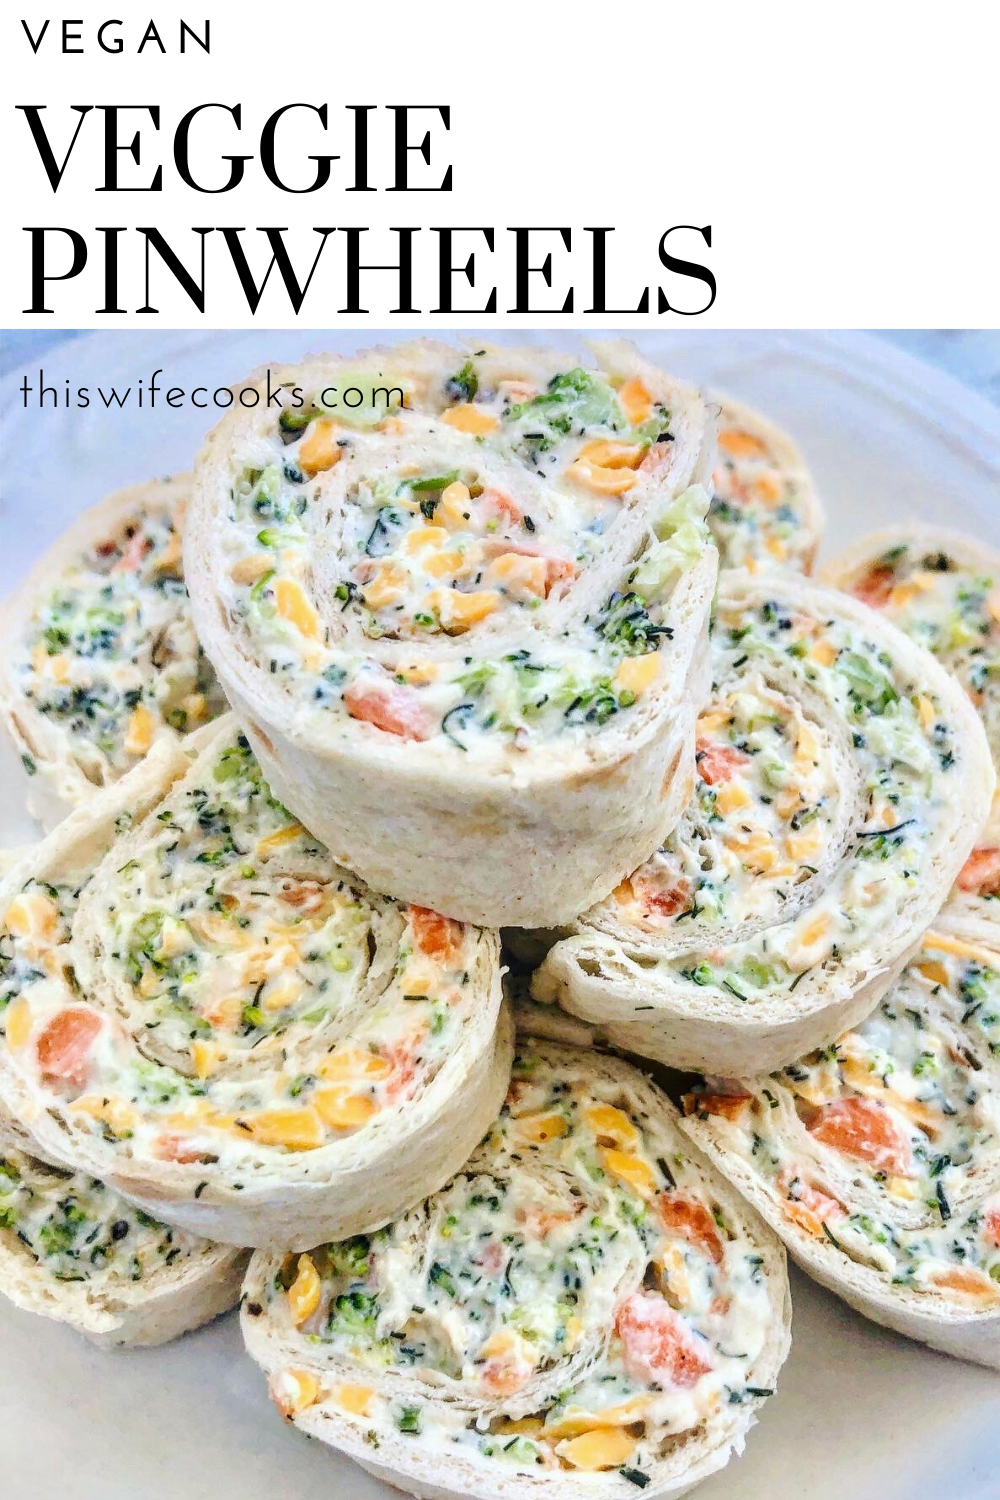 Vegan Veggie Pinwheels - Broccoli and carrots with all-vegan cream cheese, mayonnaise, cheddar cheese, herbs & spices for an easy, crowd-pleasing appetizer! via @thiswifecooks